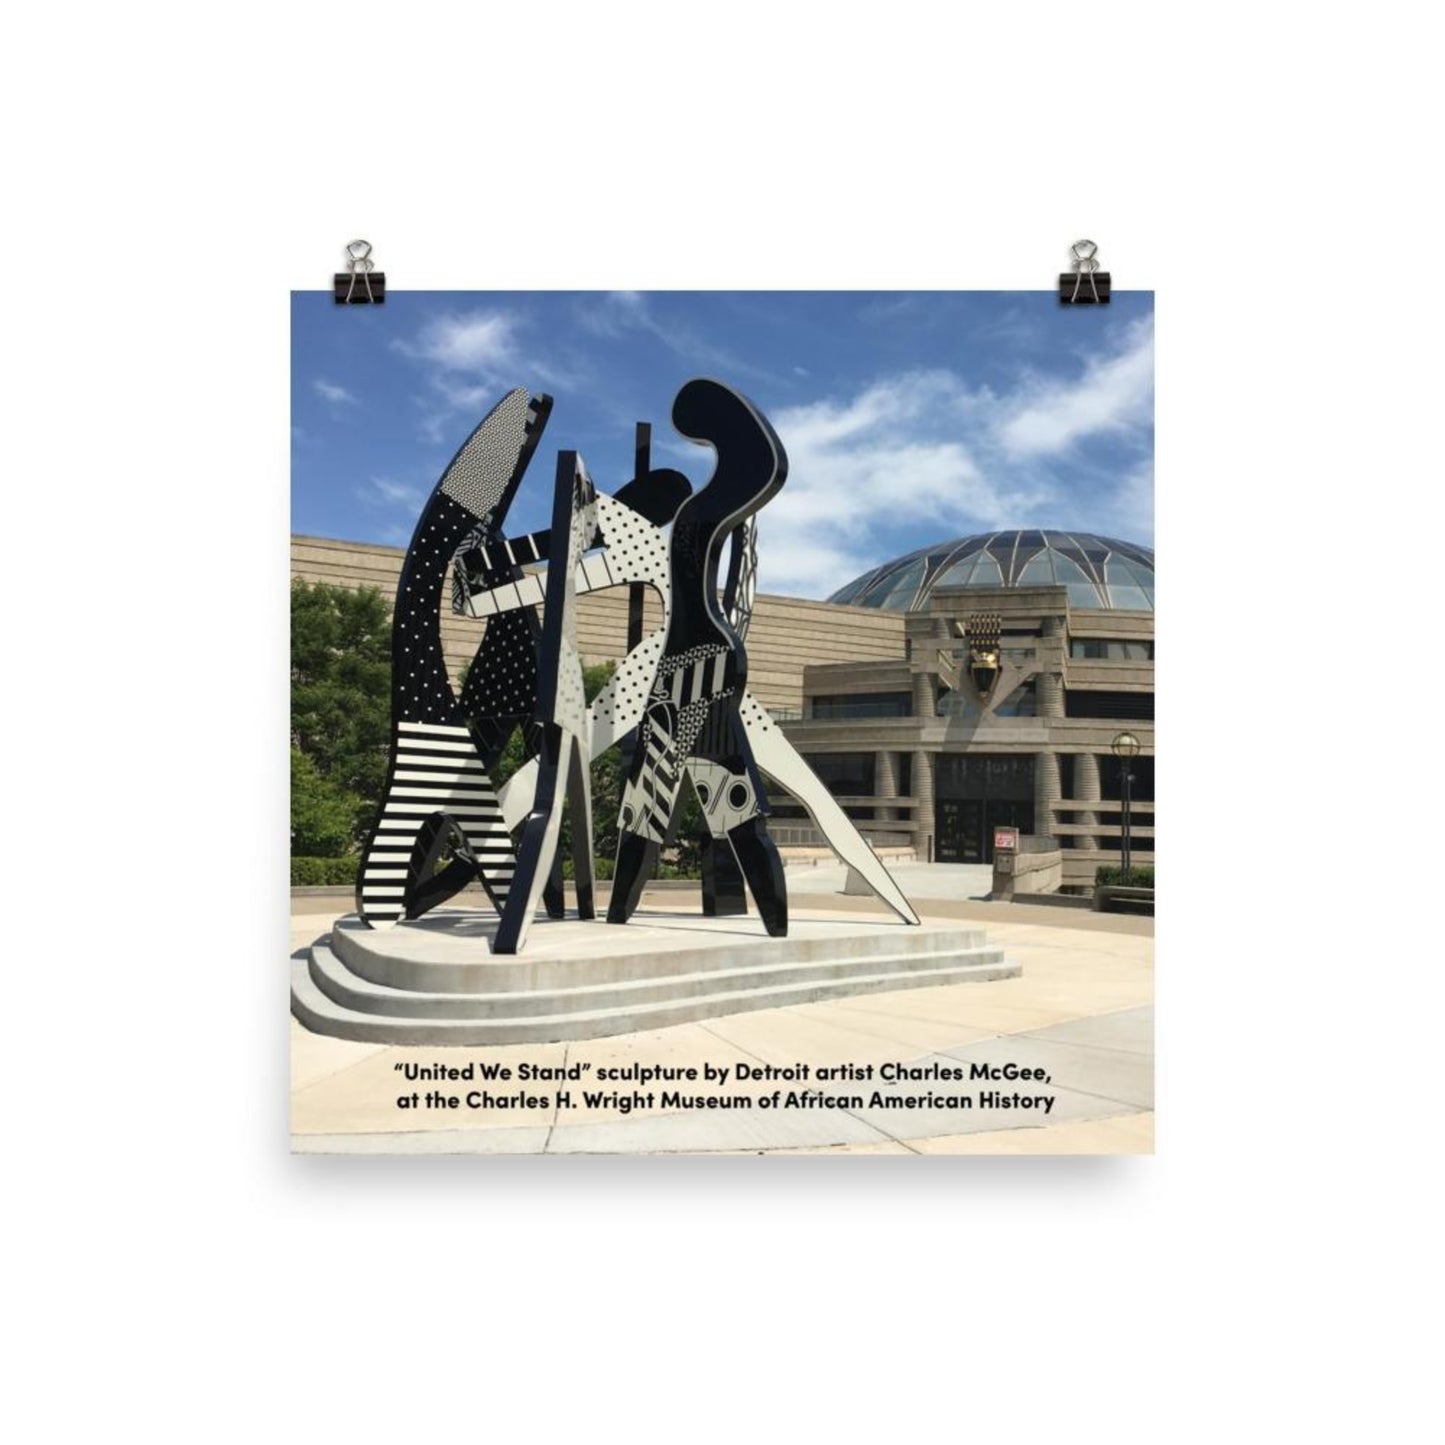 16 inch by 16 inch poster with United We Stand sculpture in front of Charles H. Wright Museum of African American History